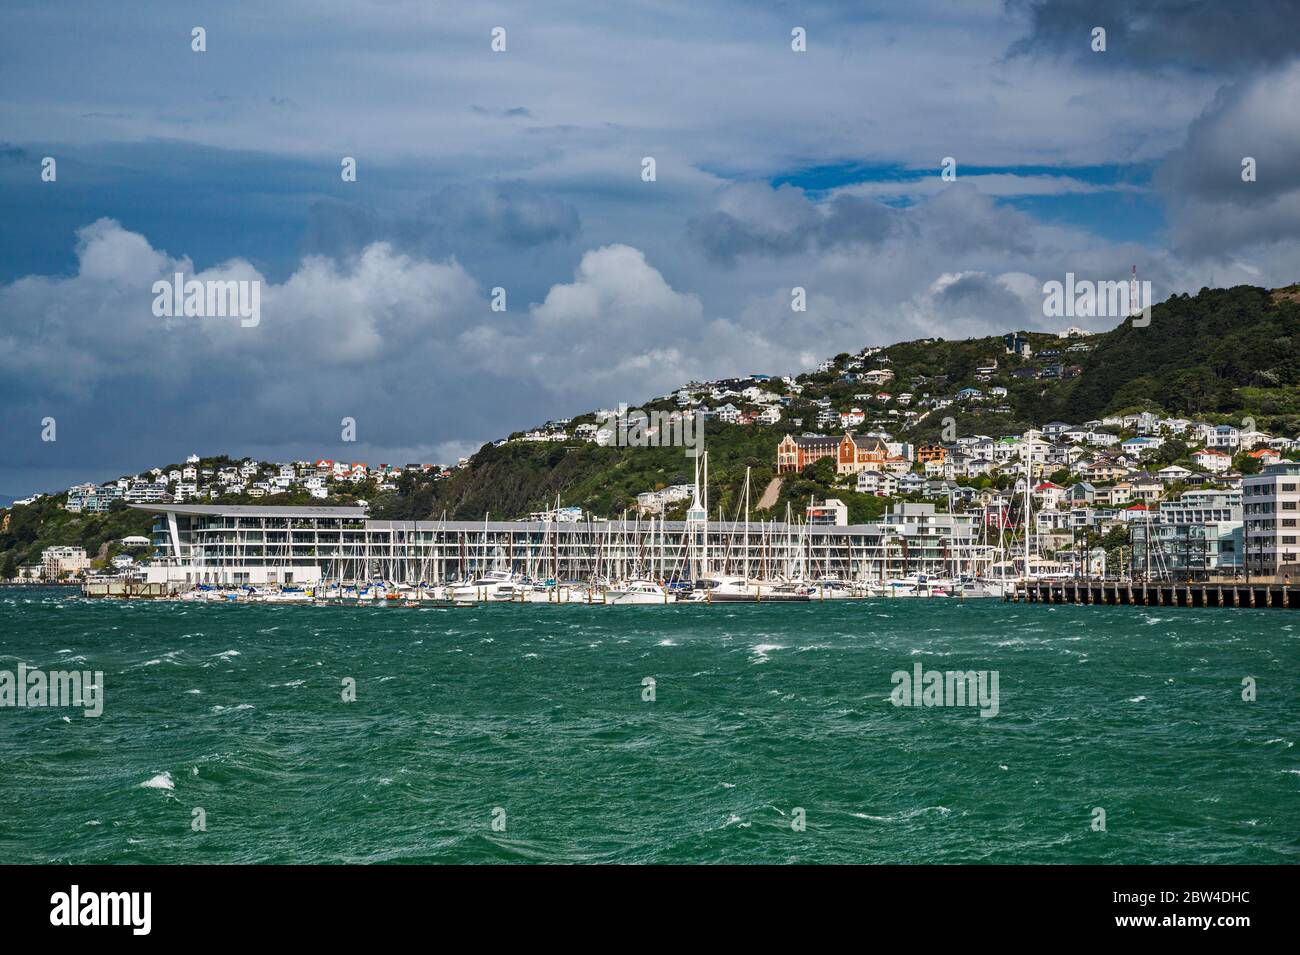 Overseas Passenger Terminal, sailboats at Chaffers Marina, Wellington Harbour, Mount Victoria in distance, in Wellington, North Island, New Zealand Stock Photo